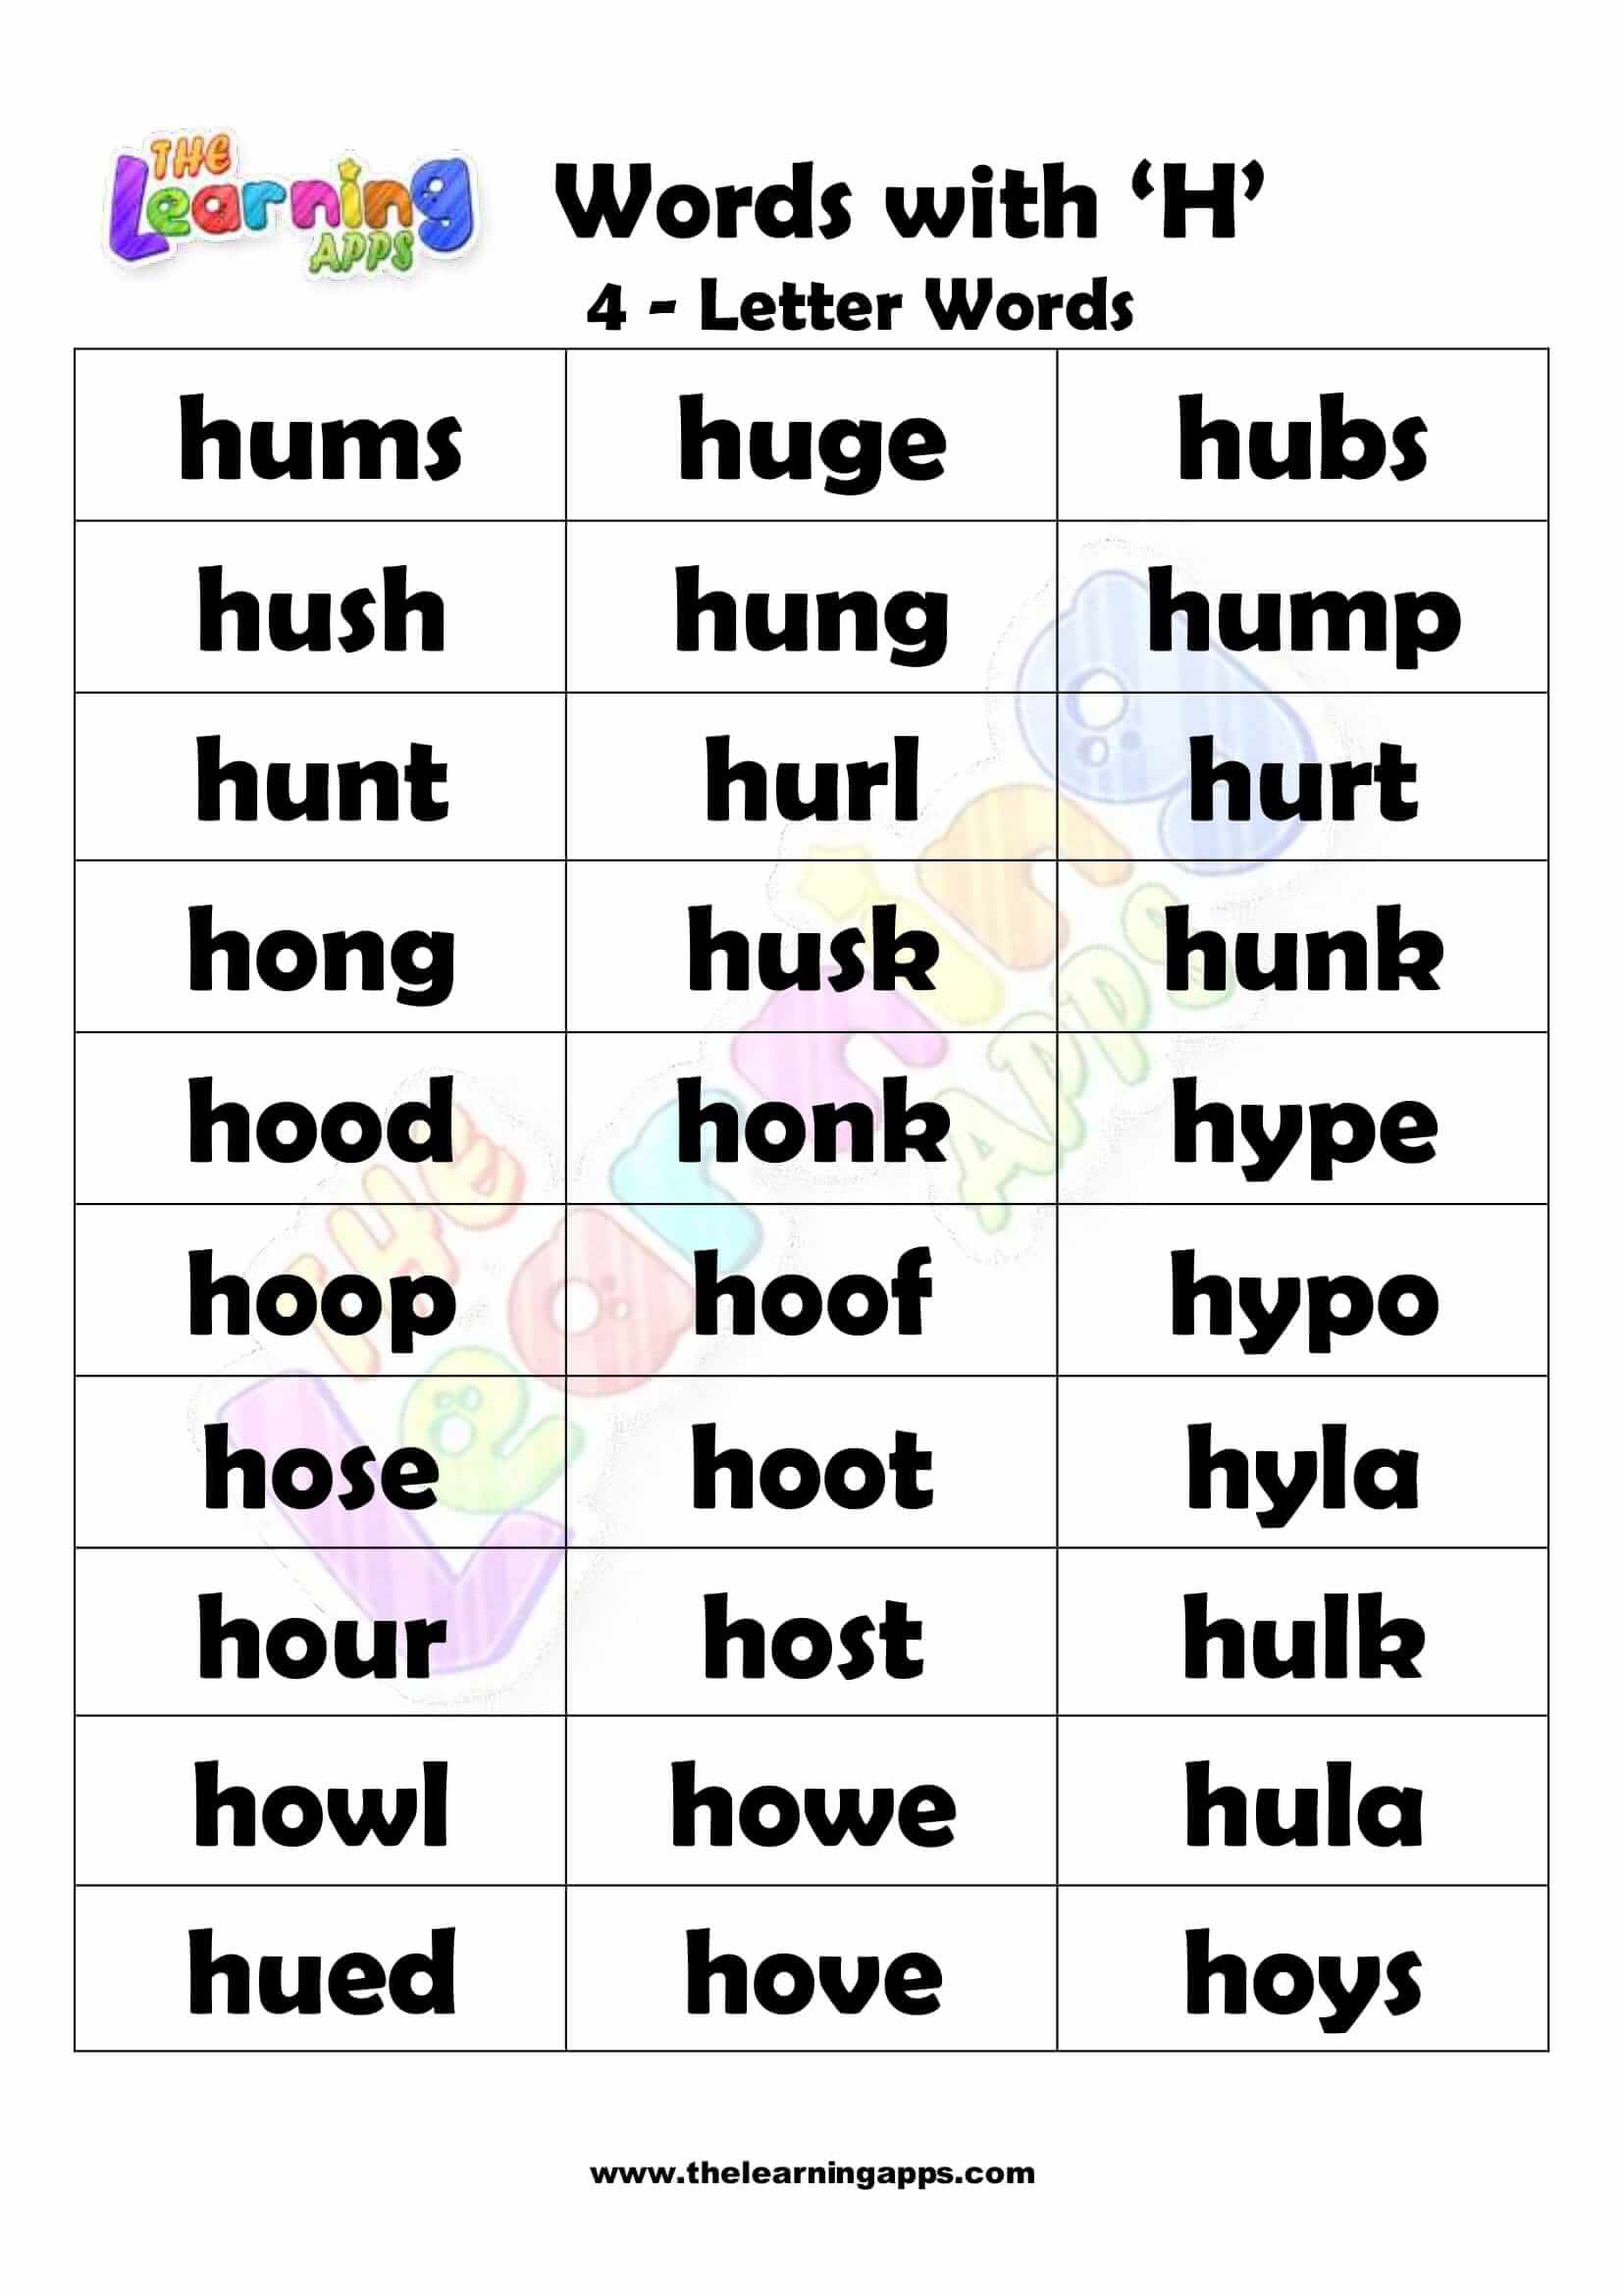 4 LETTER WORD STARTING WITH H-4